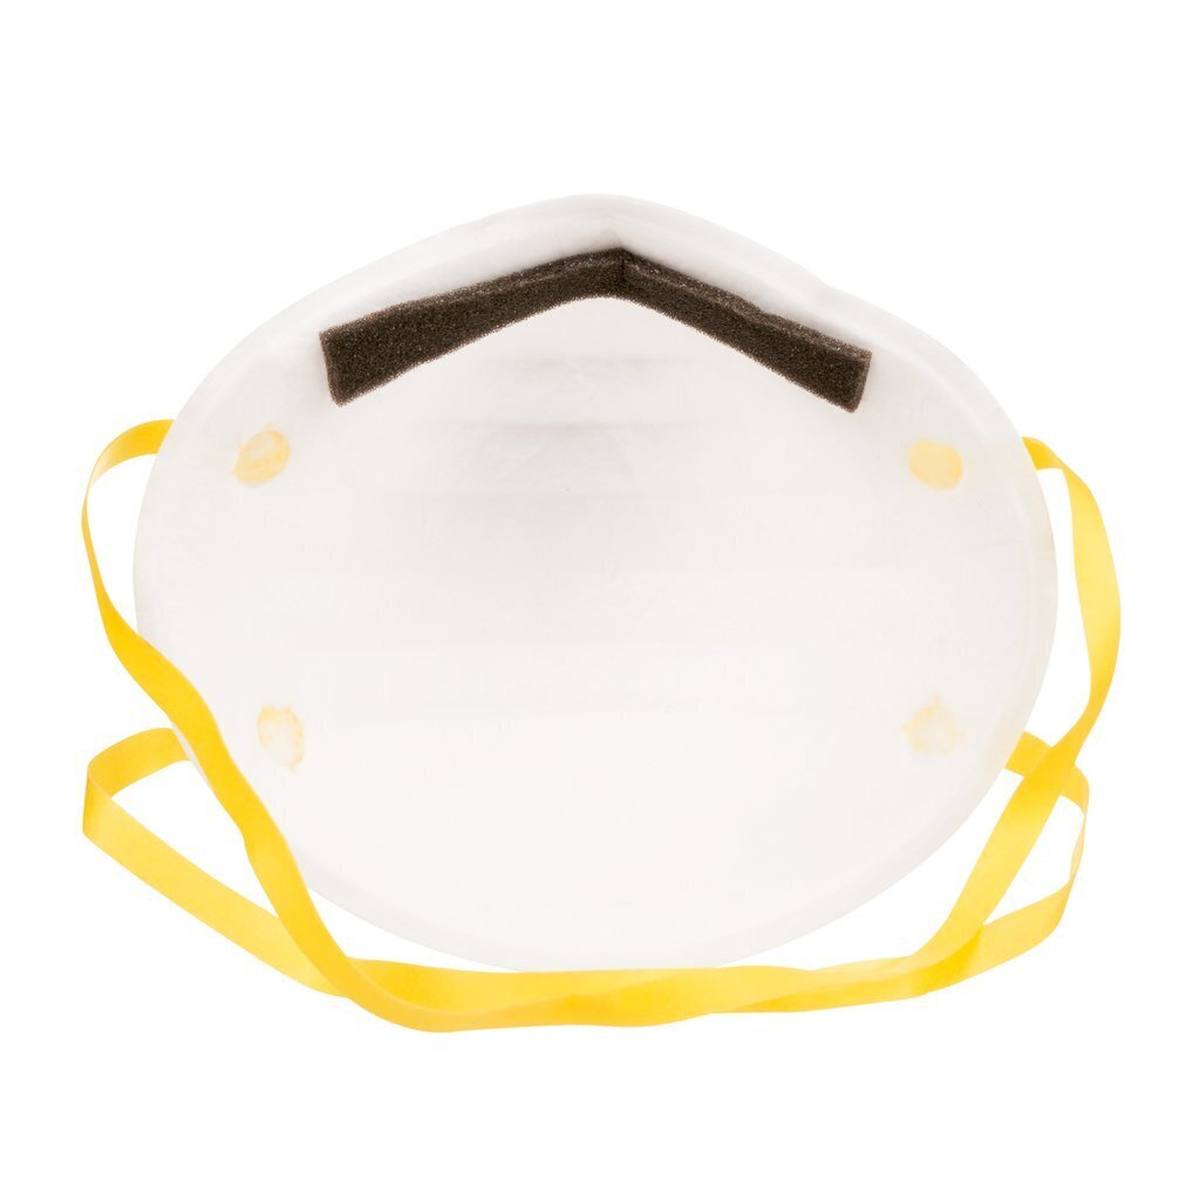 3M 8710E Respirator FFP1, up to 4 times the limit value